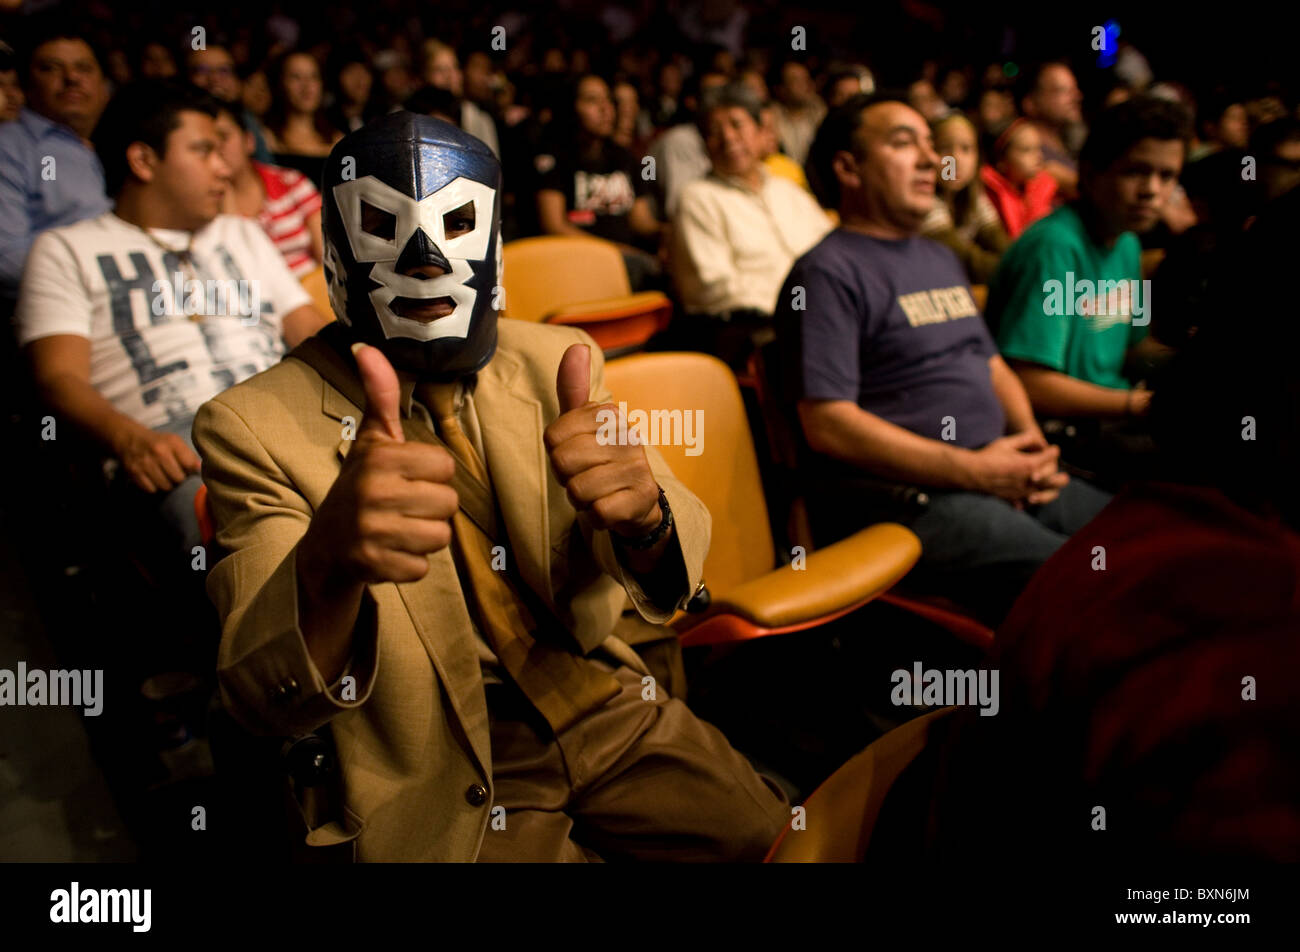 A fan wearing a Lucha Libre mask give the thumbs up as he watches a wrestling fight in Arena Mexico, Mexico City Stock Photo